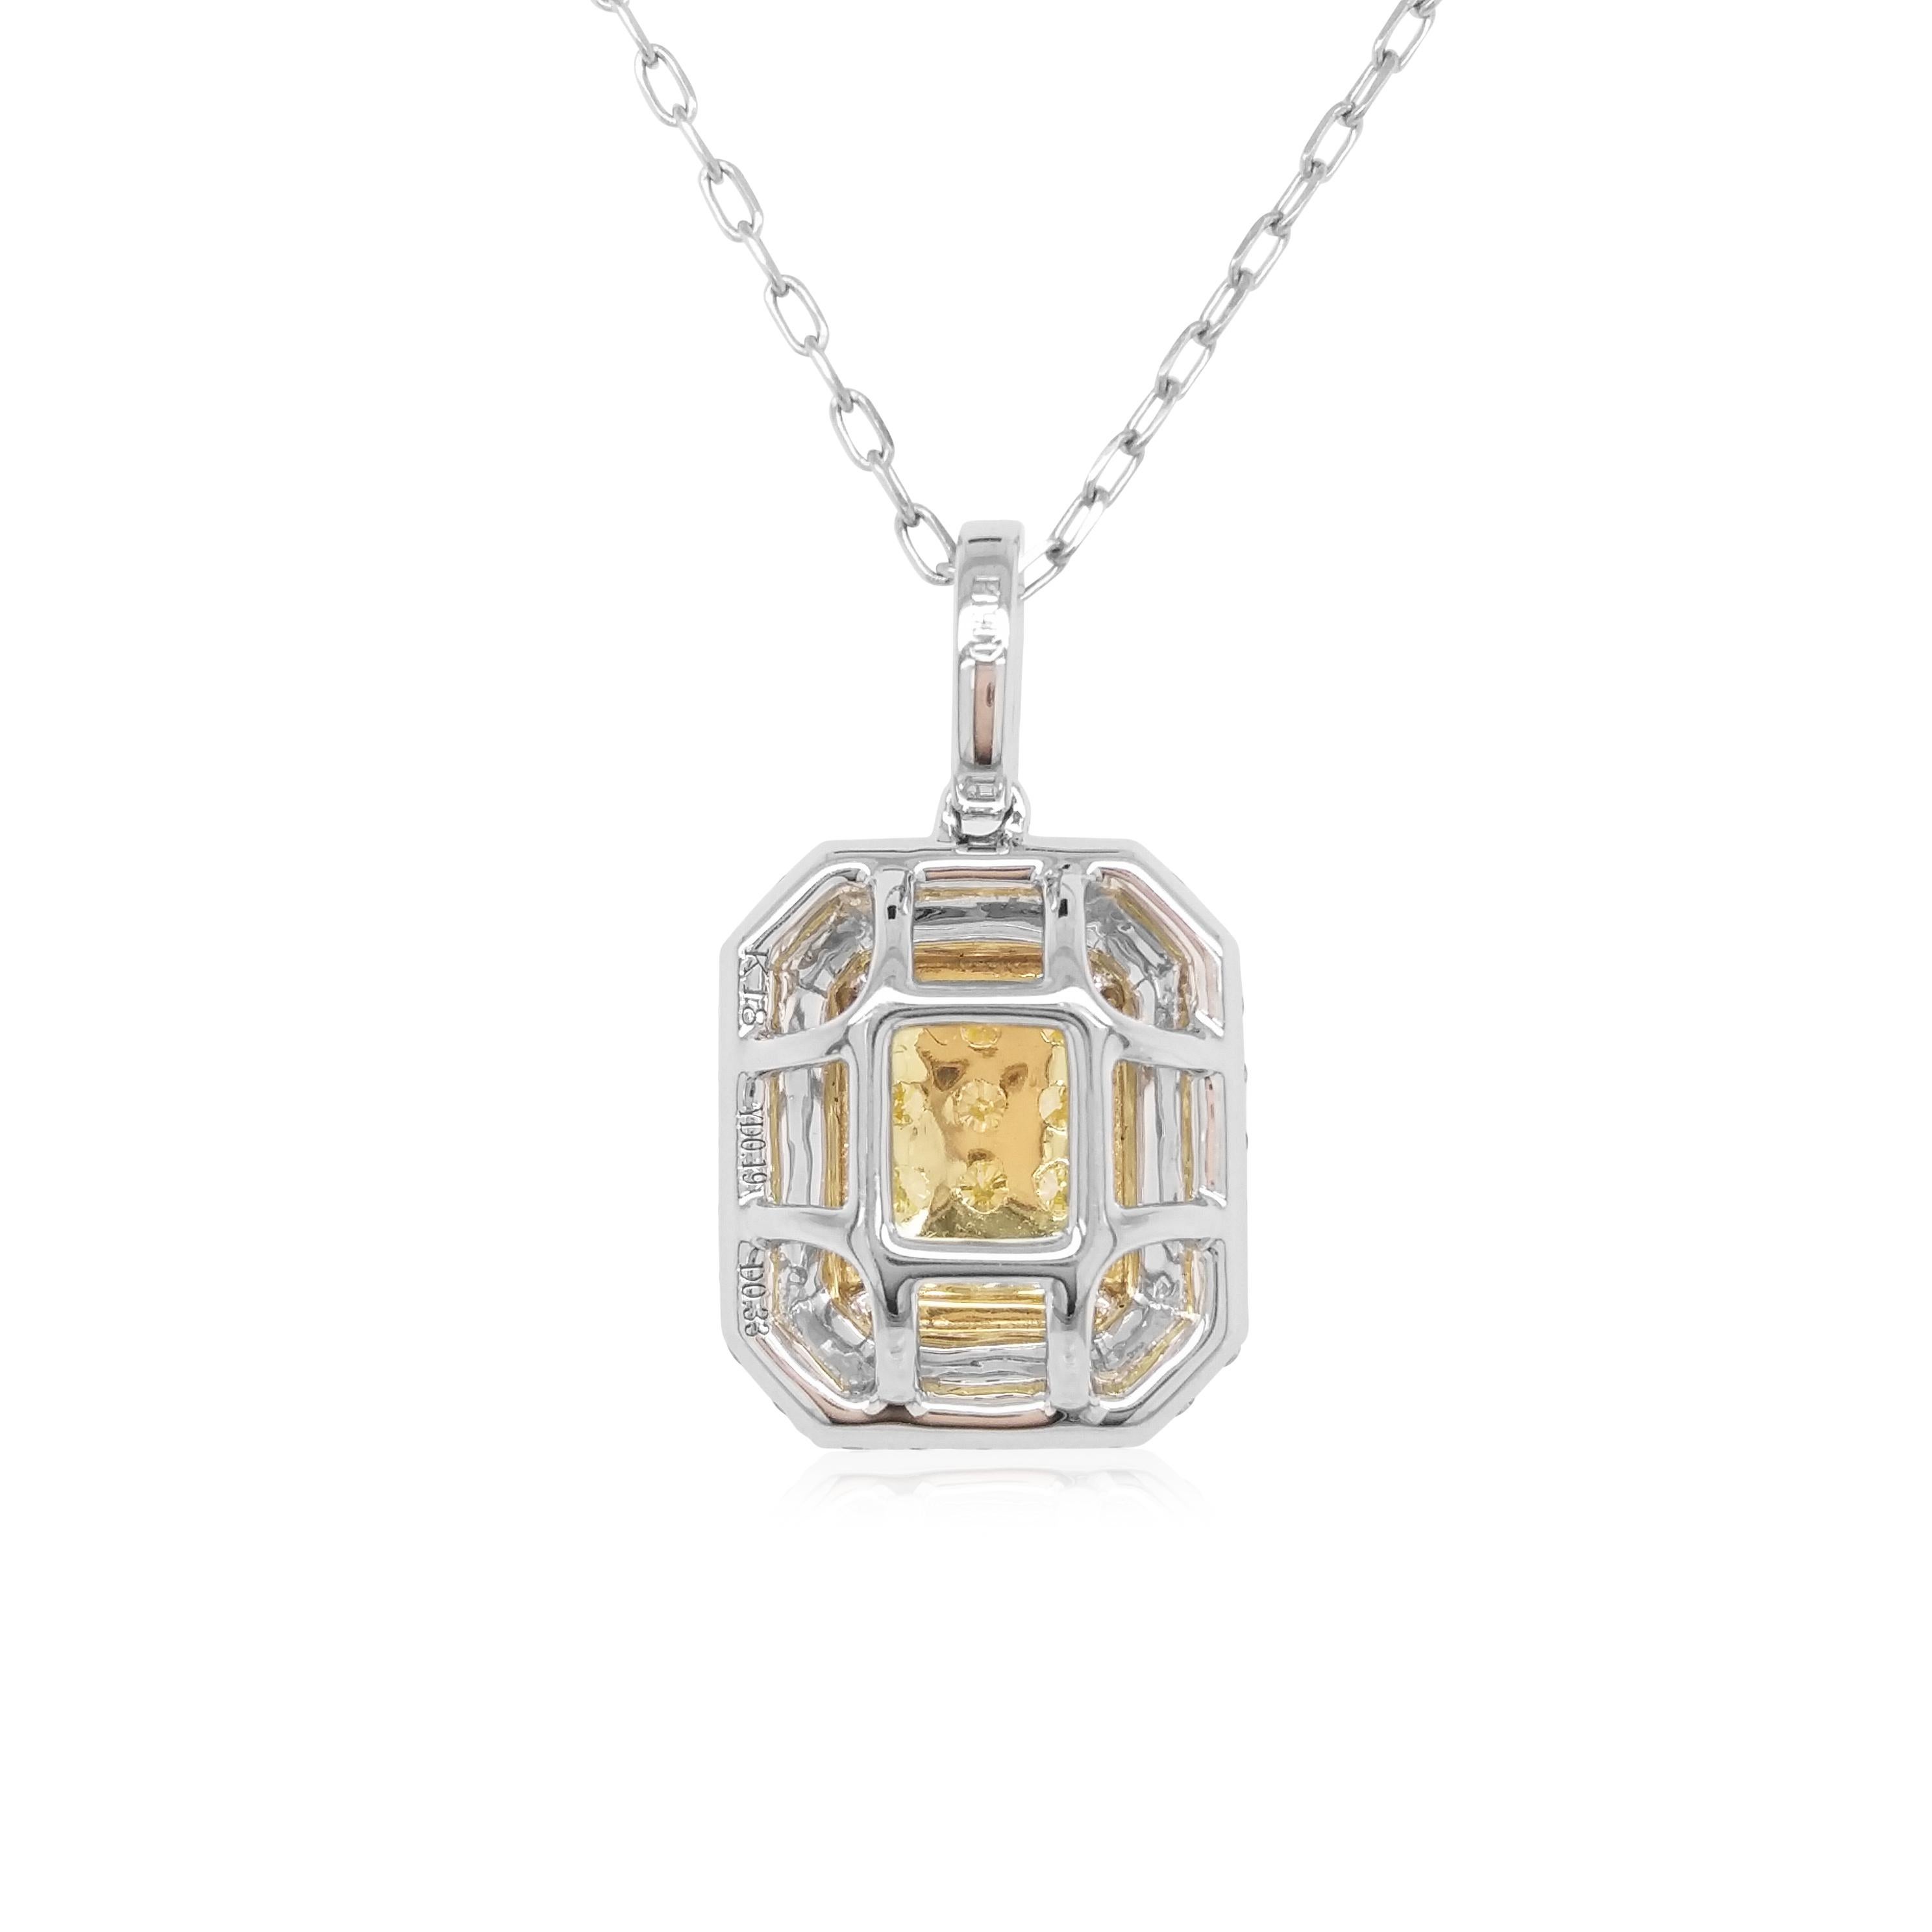 This elegant pendant features lustrous natural Yellow diamonds at the centre of the design, surrounded by halos of scintillating white diamonds. The rich colour of these diamonds is complimented perfectly by the delicate platinum and 18 Karat Yellow